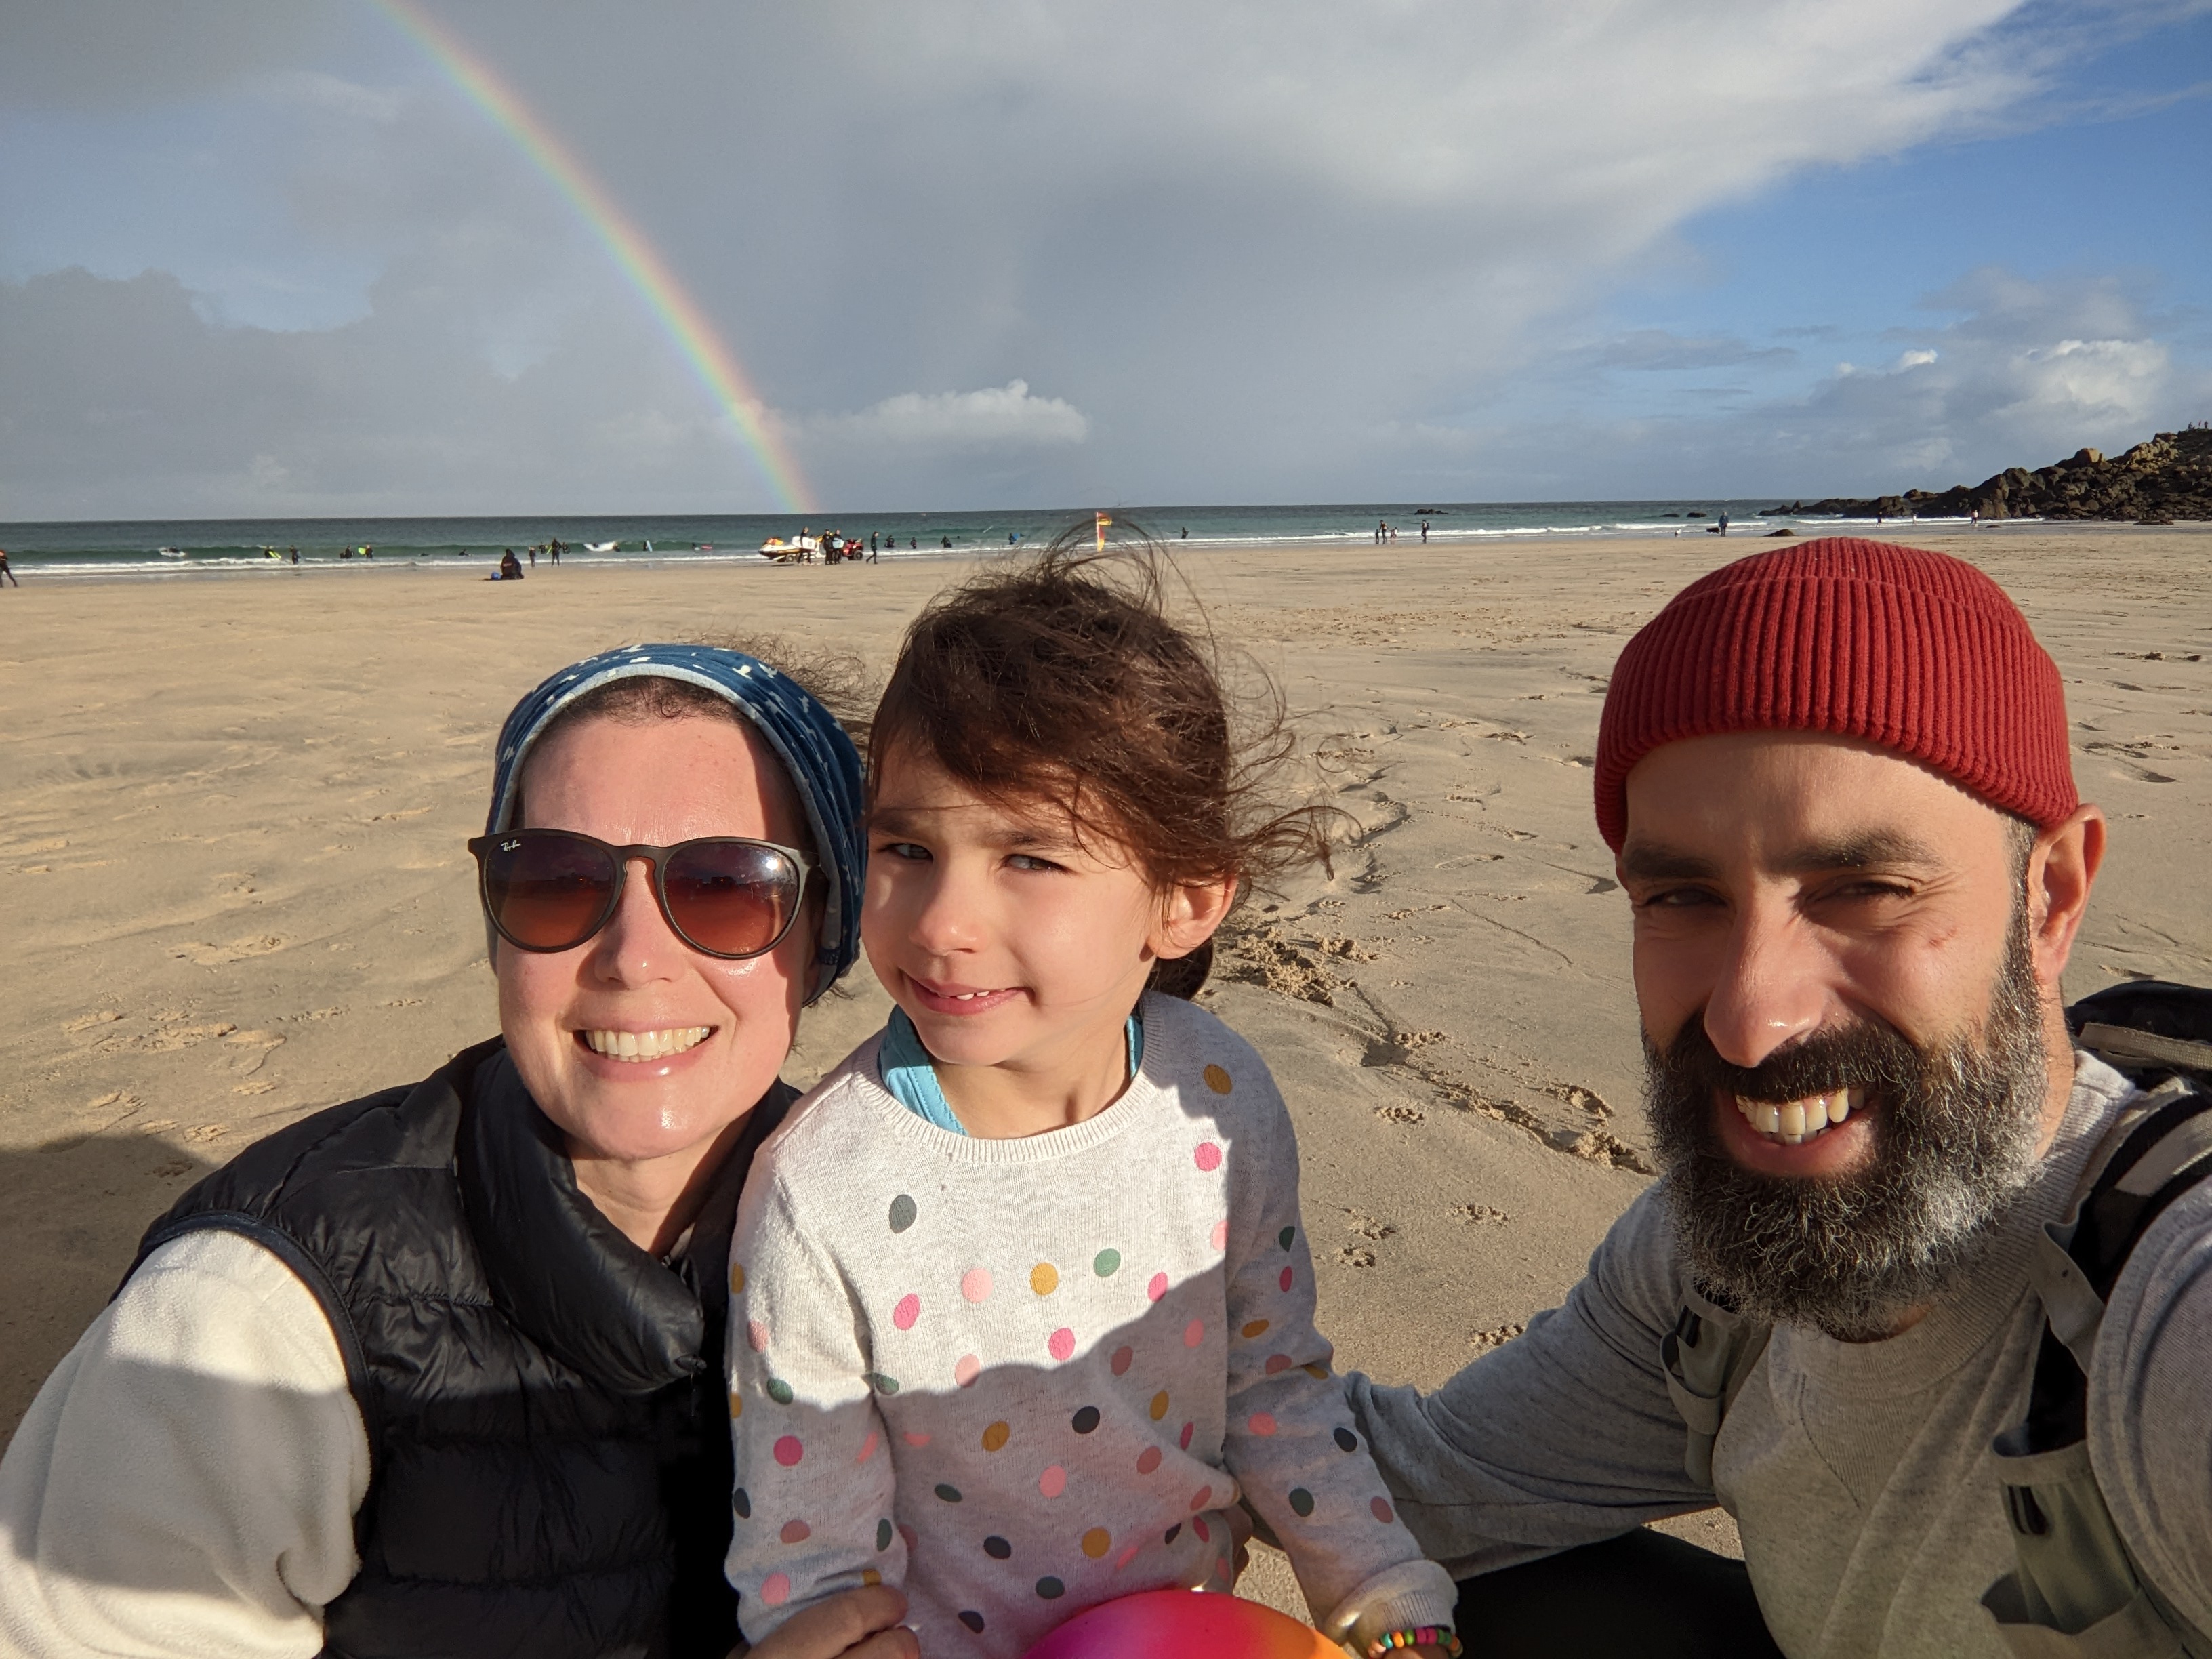 Clare Mariconda pictured alongside her four-year-old daughter and her husband